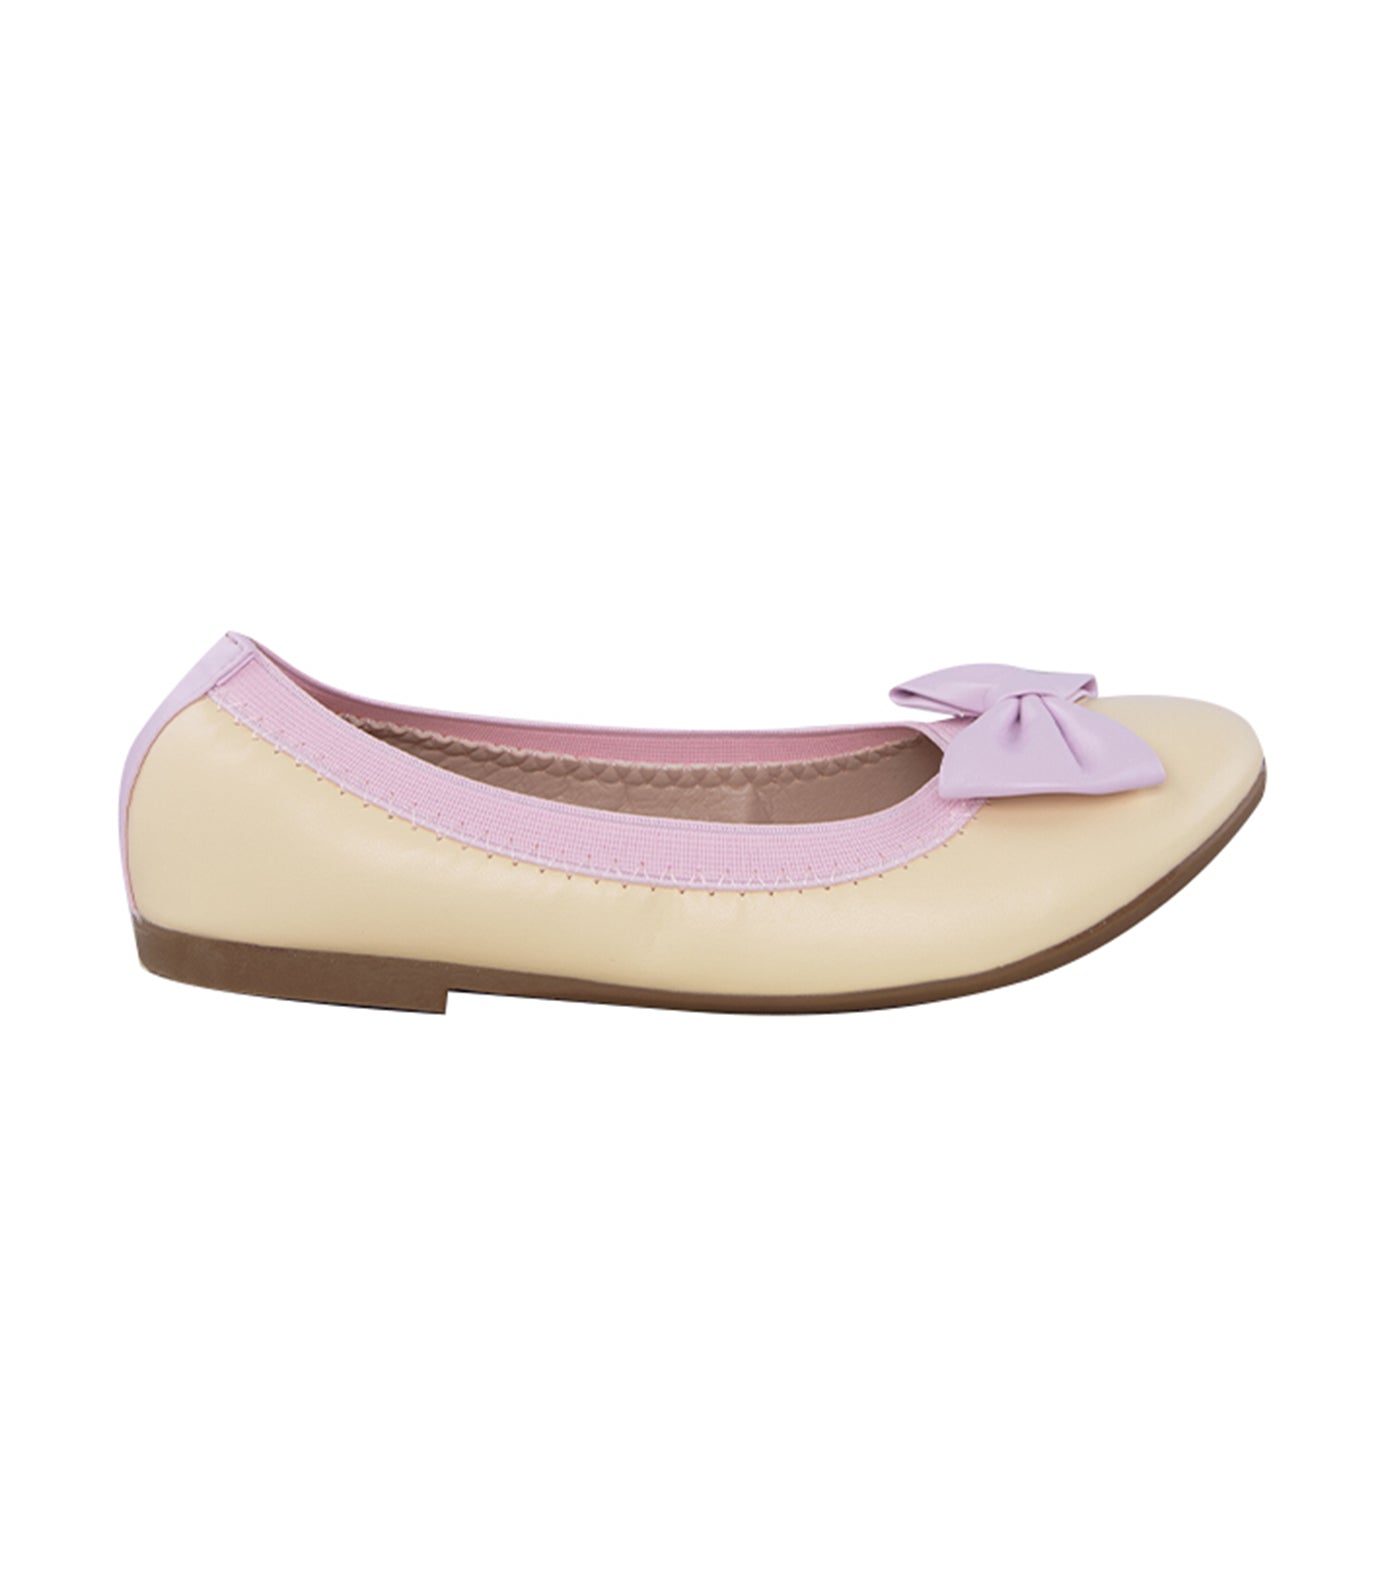 Brie Kids Flats for Girls - Yellow